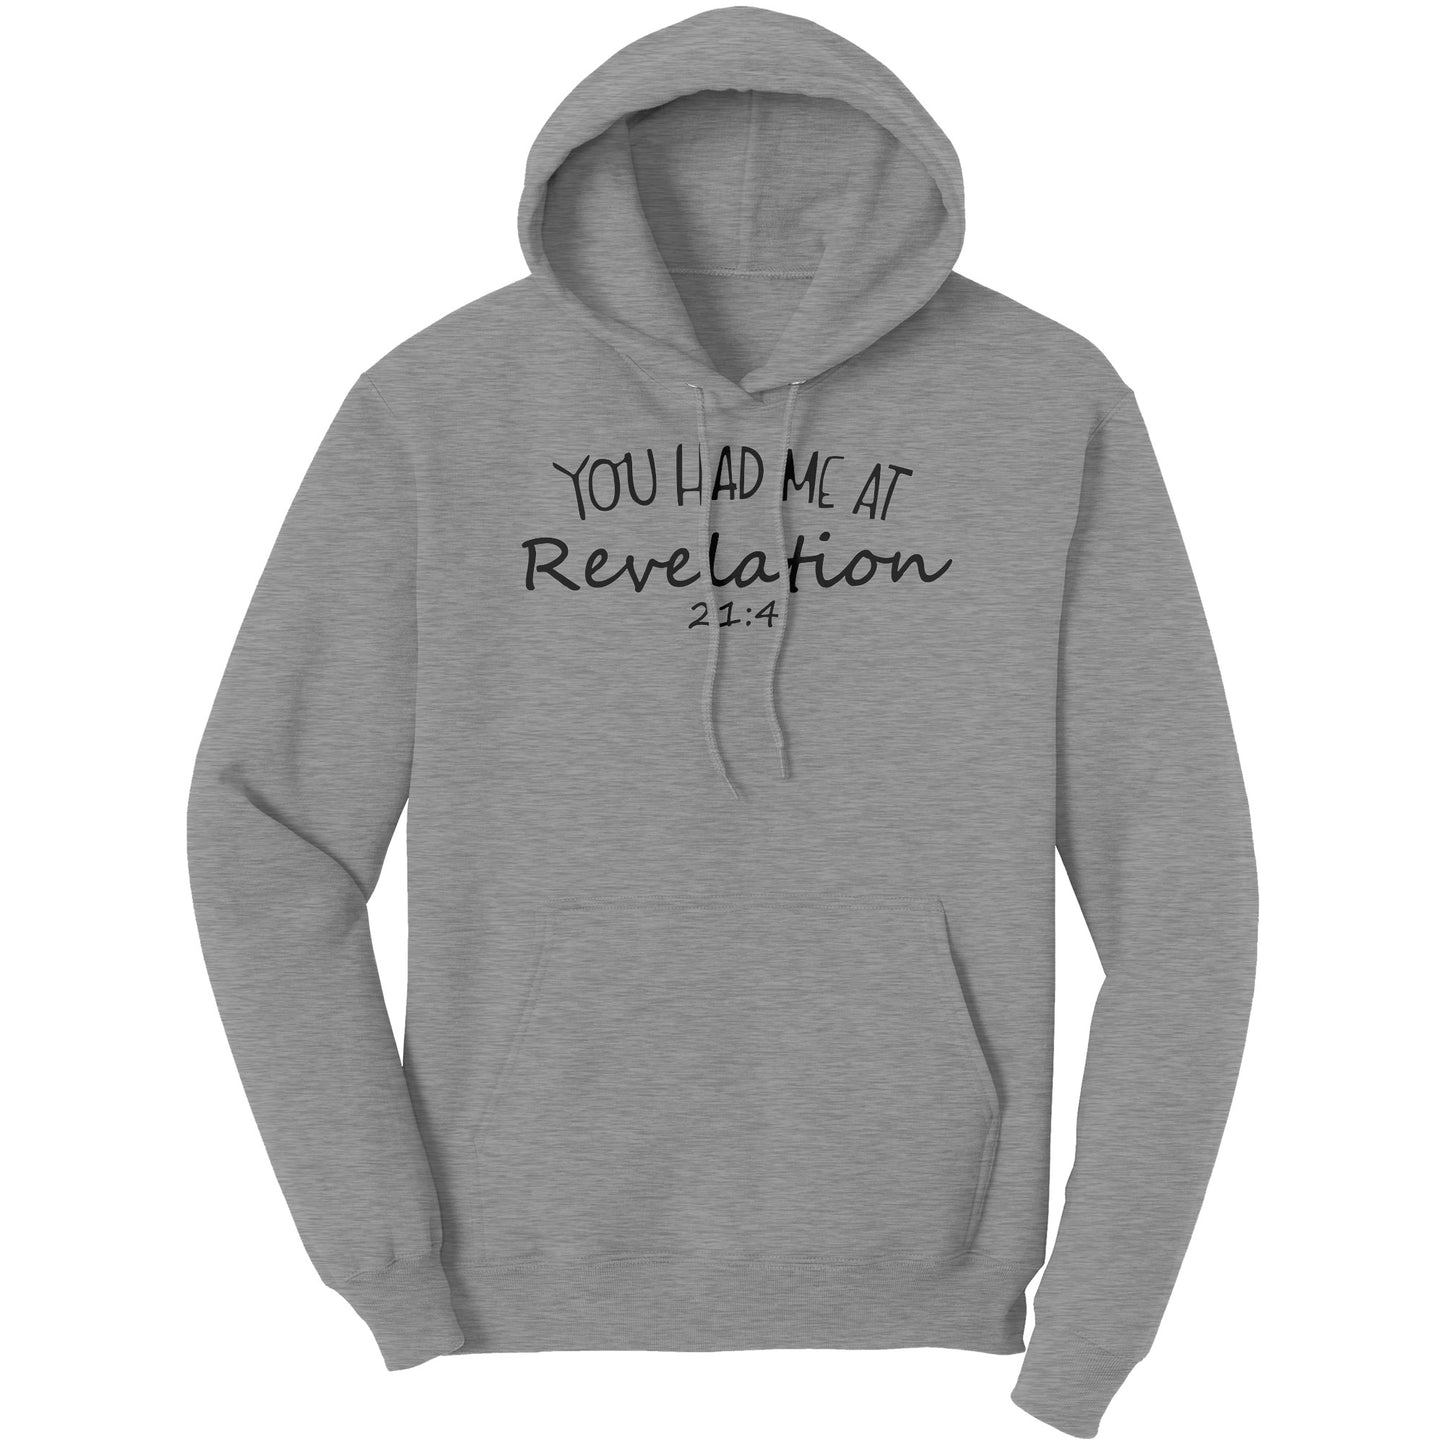 You Had Me At Revelation 21:4 Hoodie Part 1